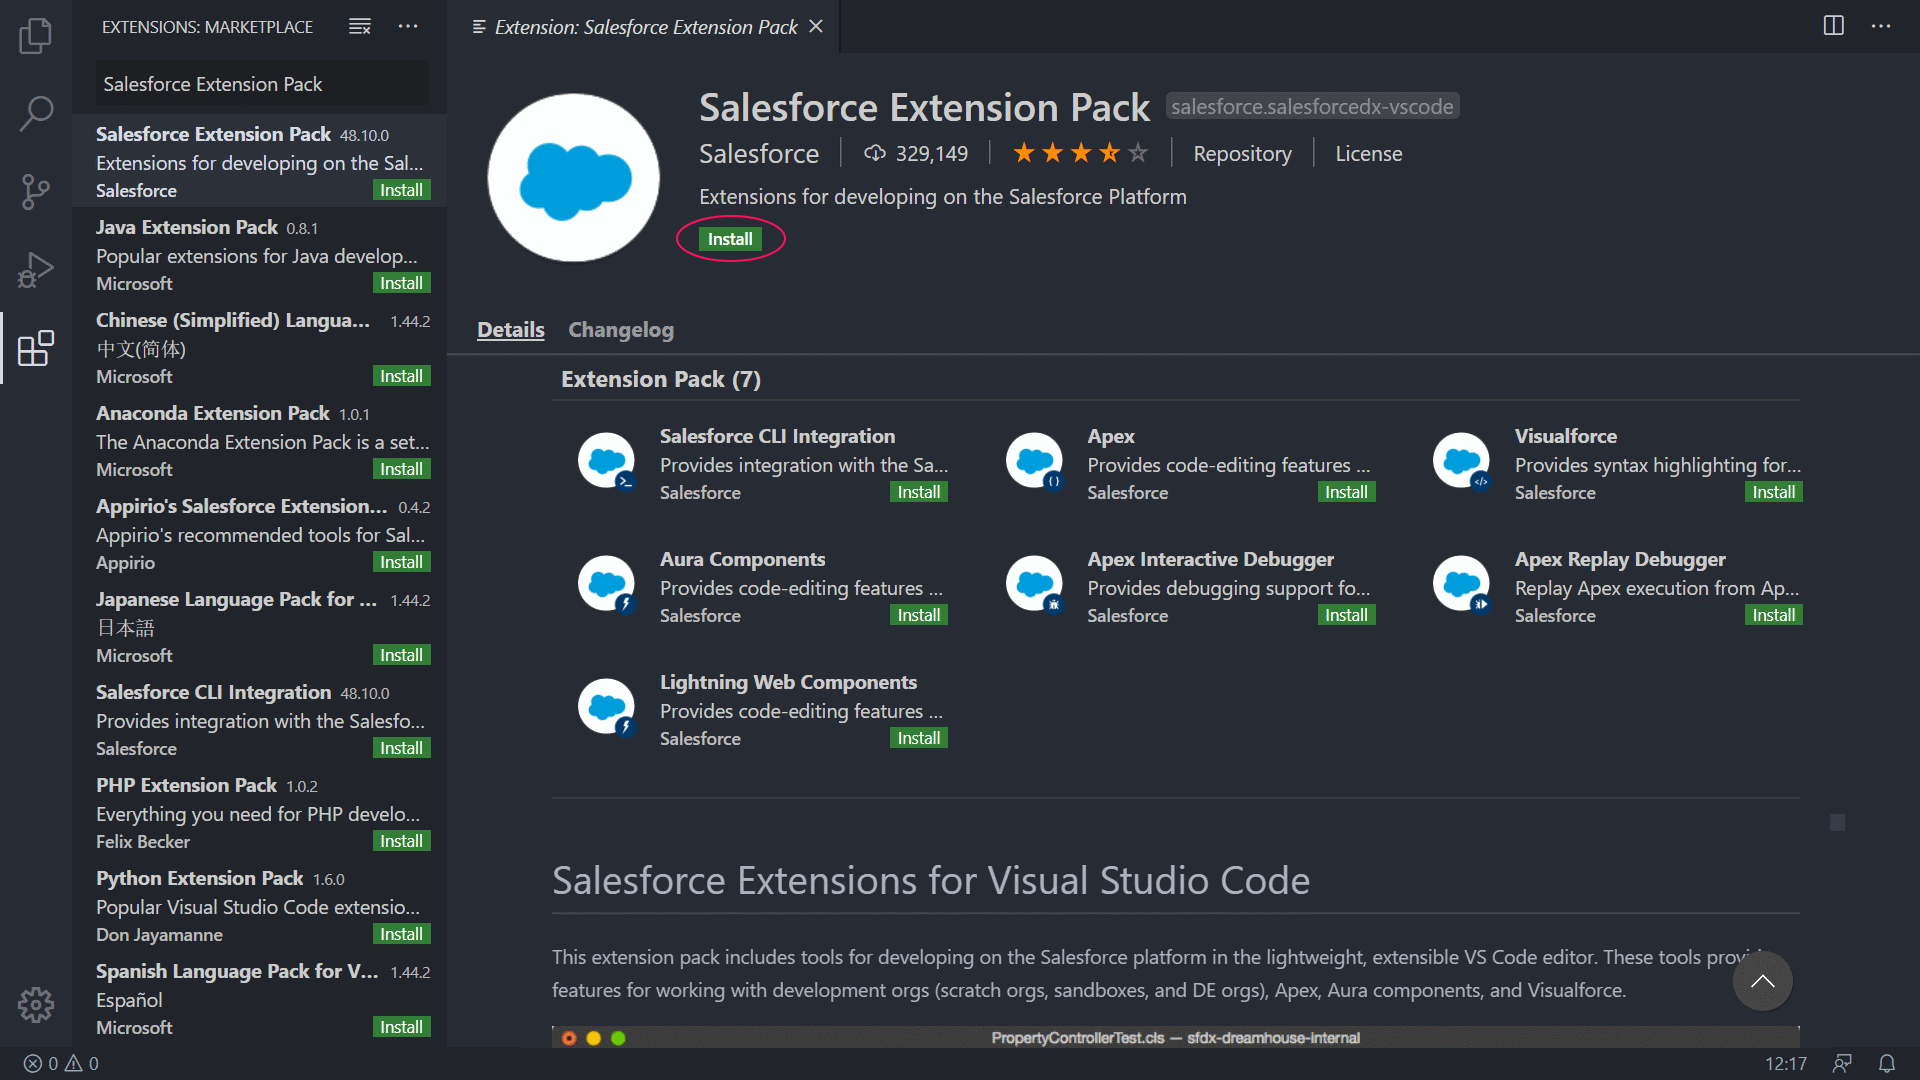 salesforce-extension-pack-image